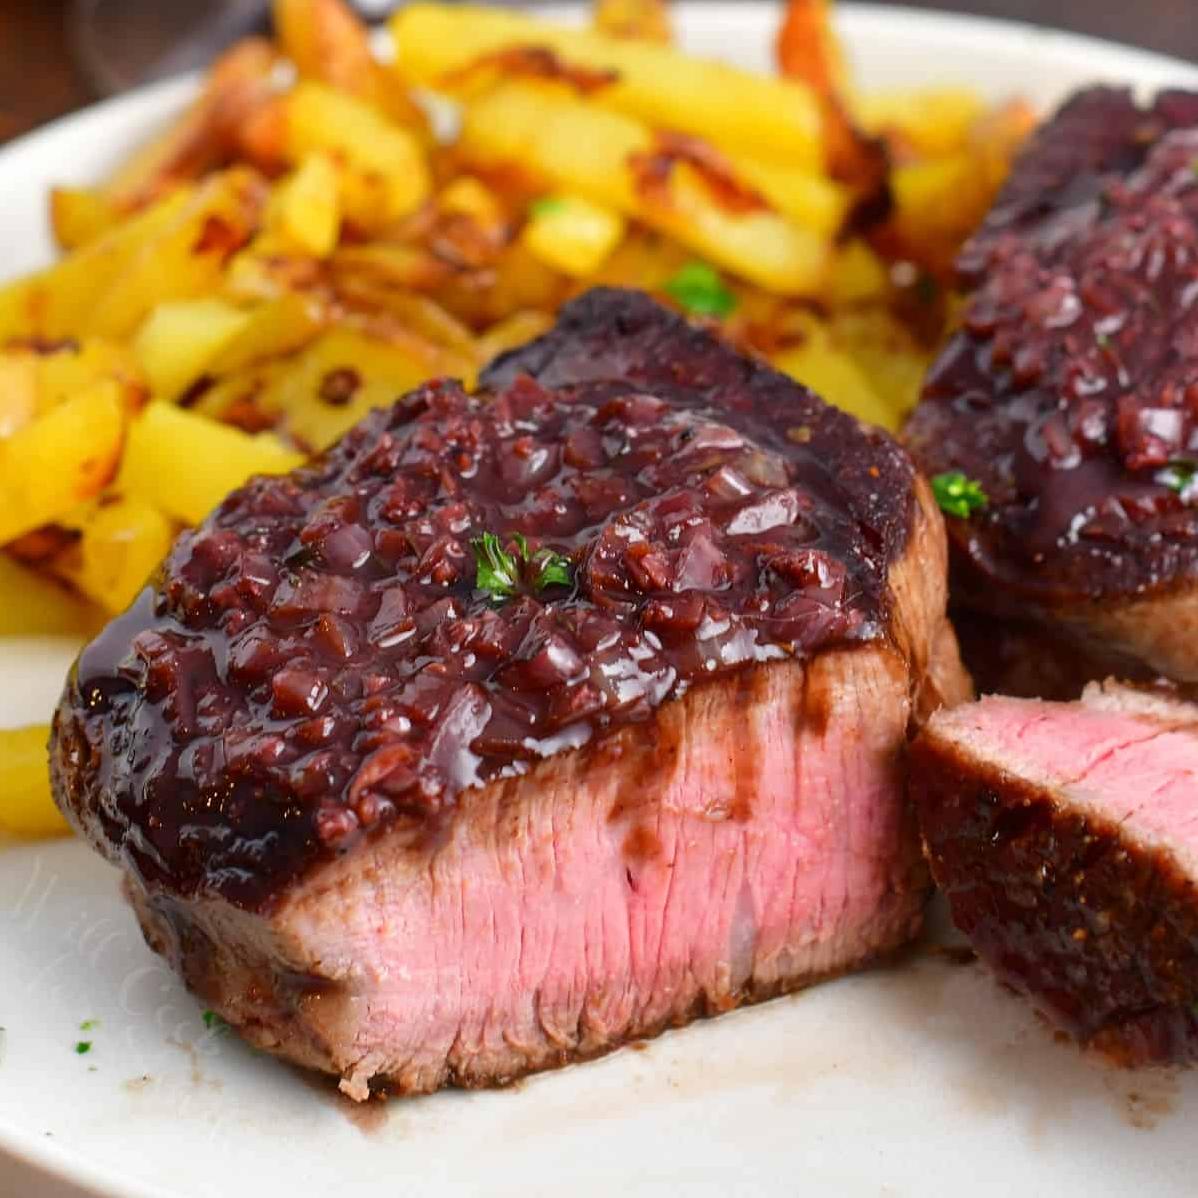  In a world full of boring beef dishes, this steak with red wine sauce is an absolute standout